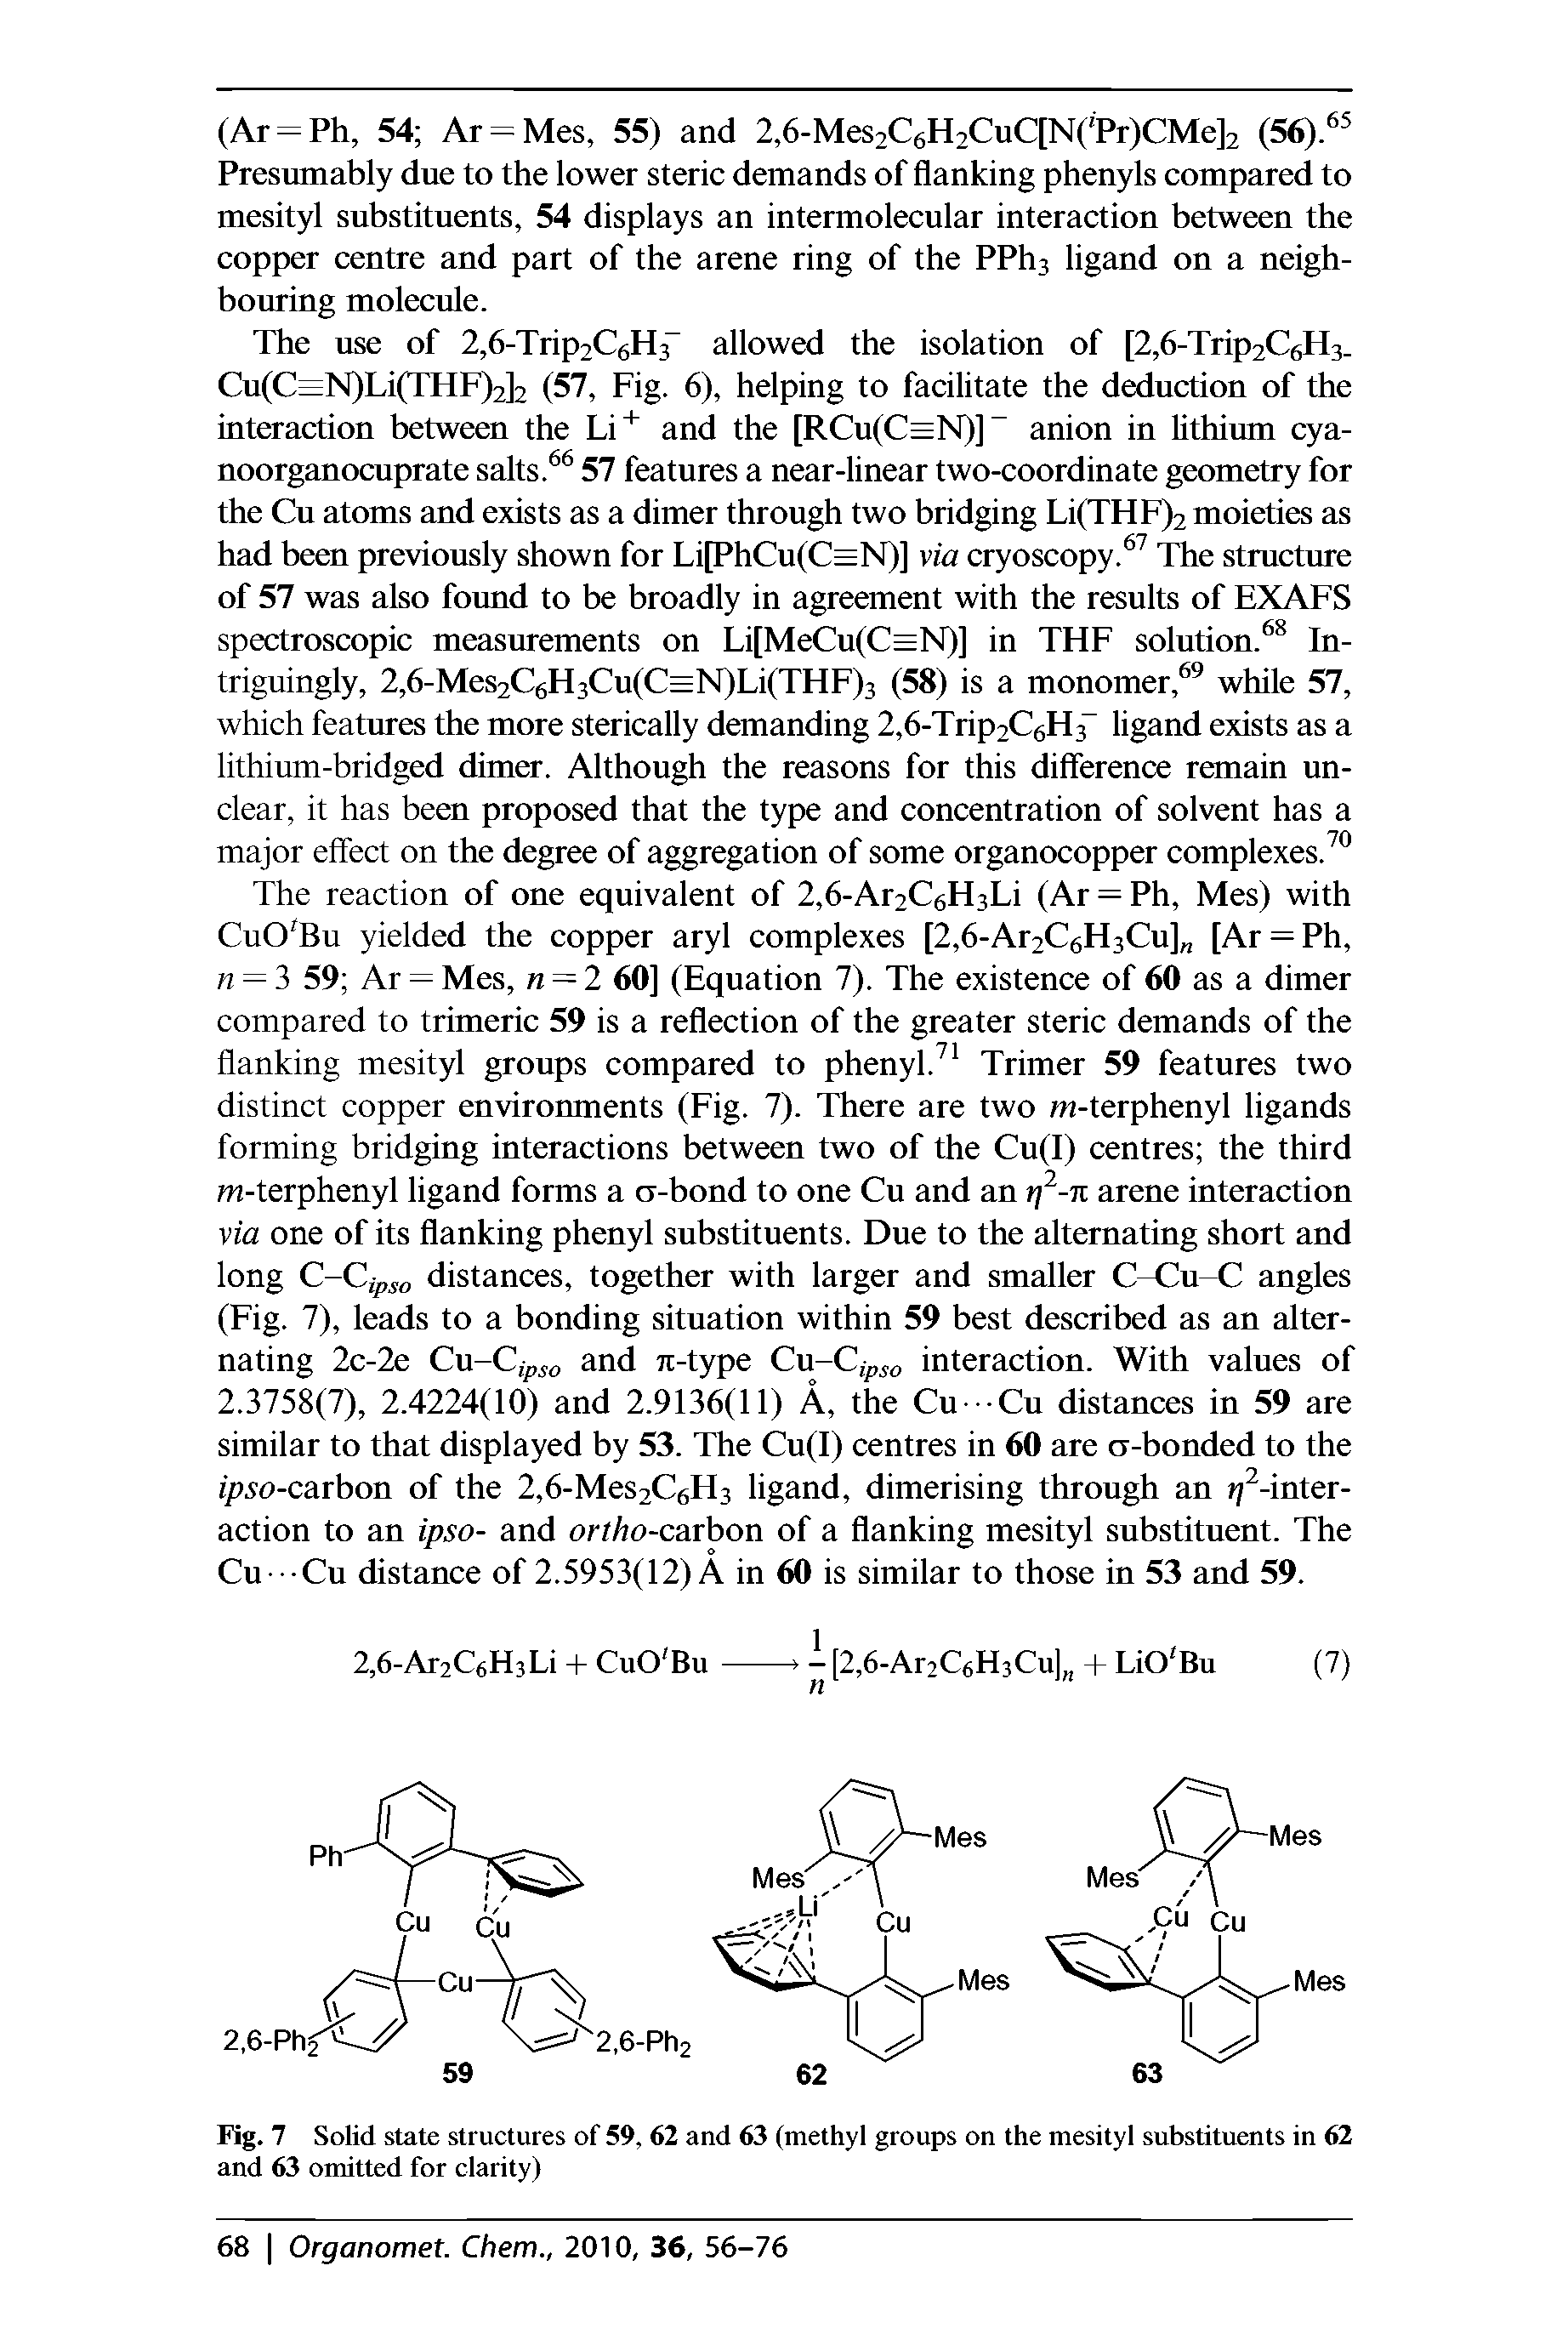 Fig. 7 Solid state structures of 59, 62 and 63 (methyl groups on the mesityl substituents in 62 and 63 omitted for clarity)...